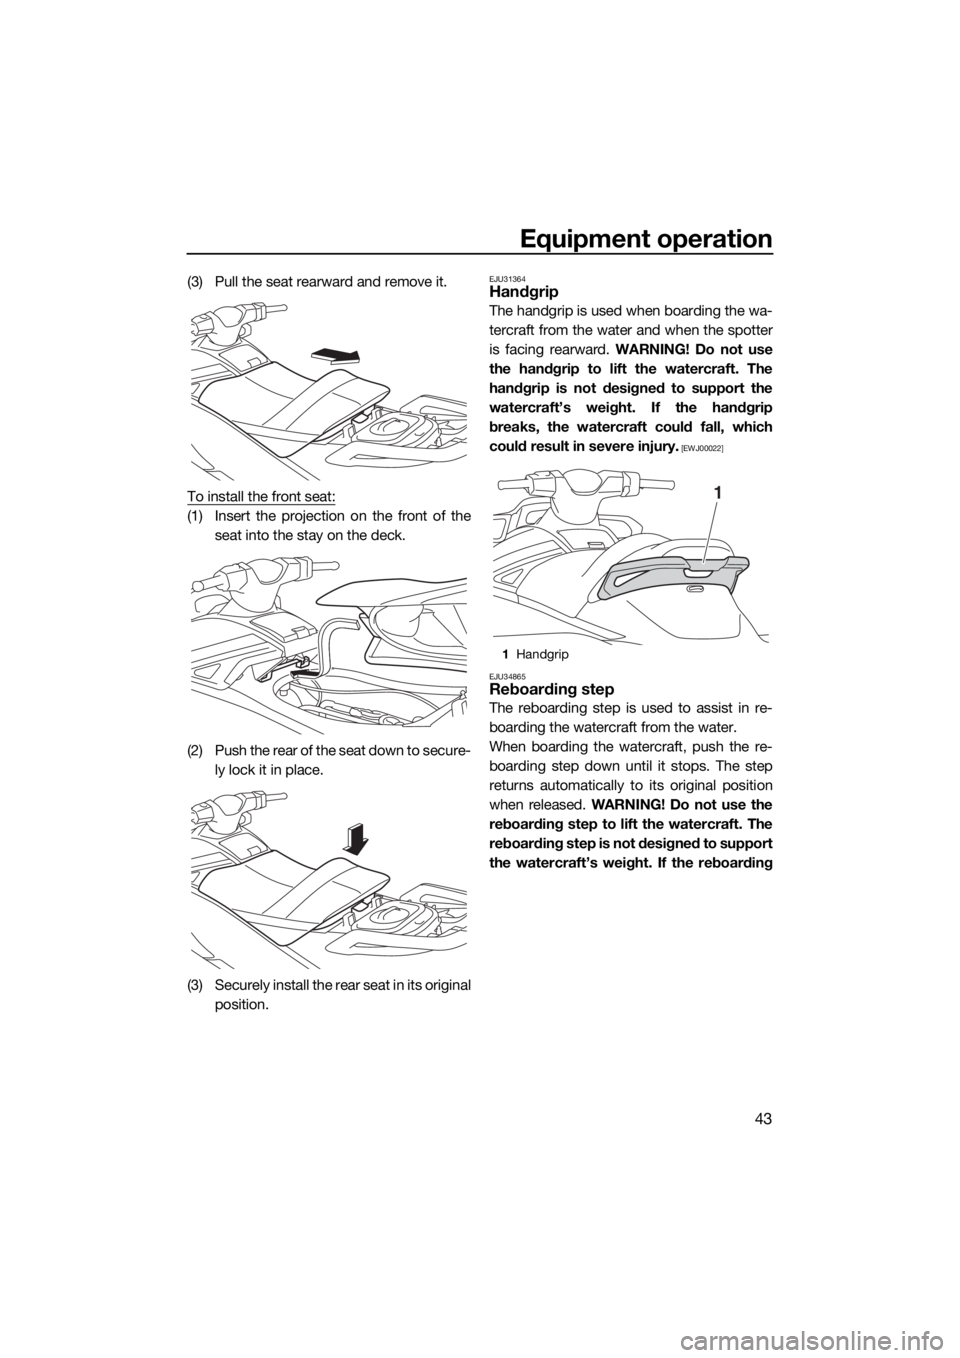 YAMAHA GP1800 2017  Owners Manual Equipment operation
43
(3) Pull the seat rearward and remove it.
To install the front seat:
(1) Insert the projection on the front of the
seat into the stay on the deck.
(2) Push the rear of the seat 